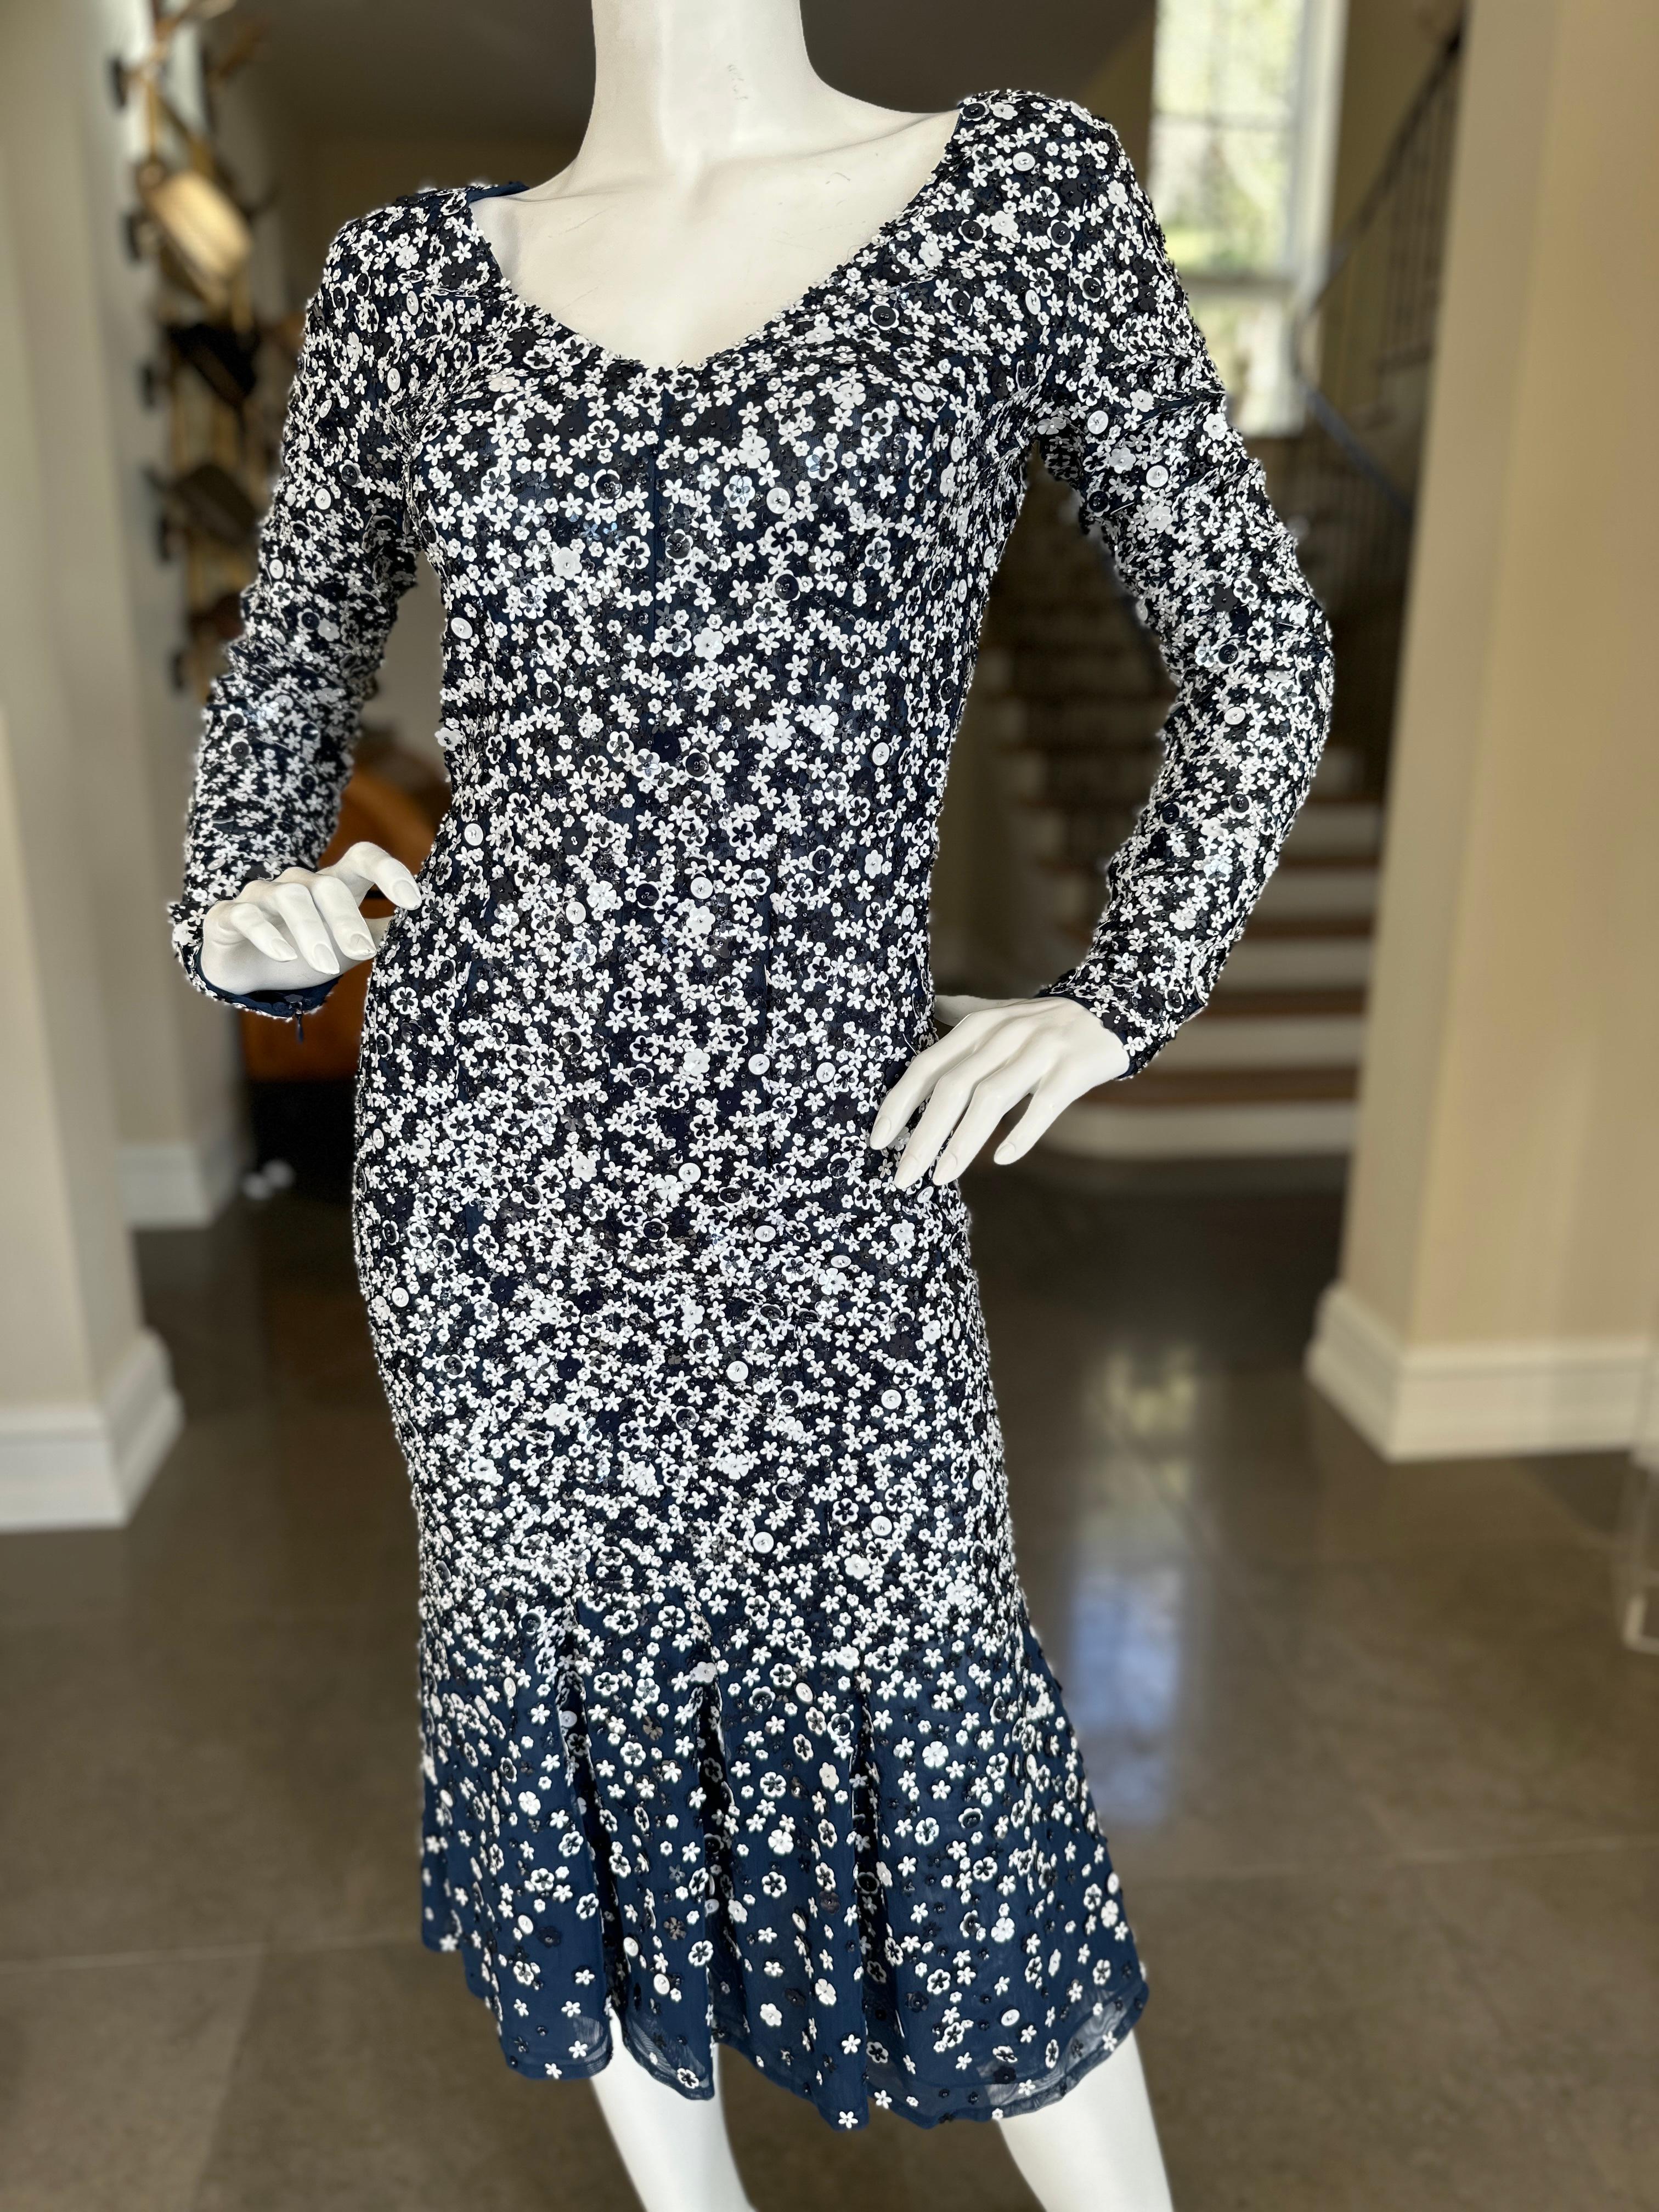 Michael Kors Collection Long Sleeve Blue Dress with Flower Sequin Details

Made in Italy

Size 6, there is a lot of stretch

 Bust 34